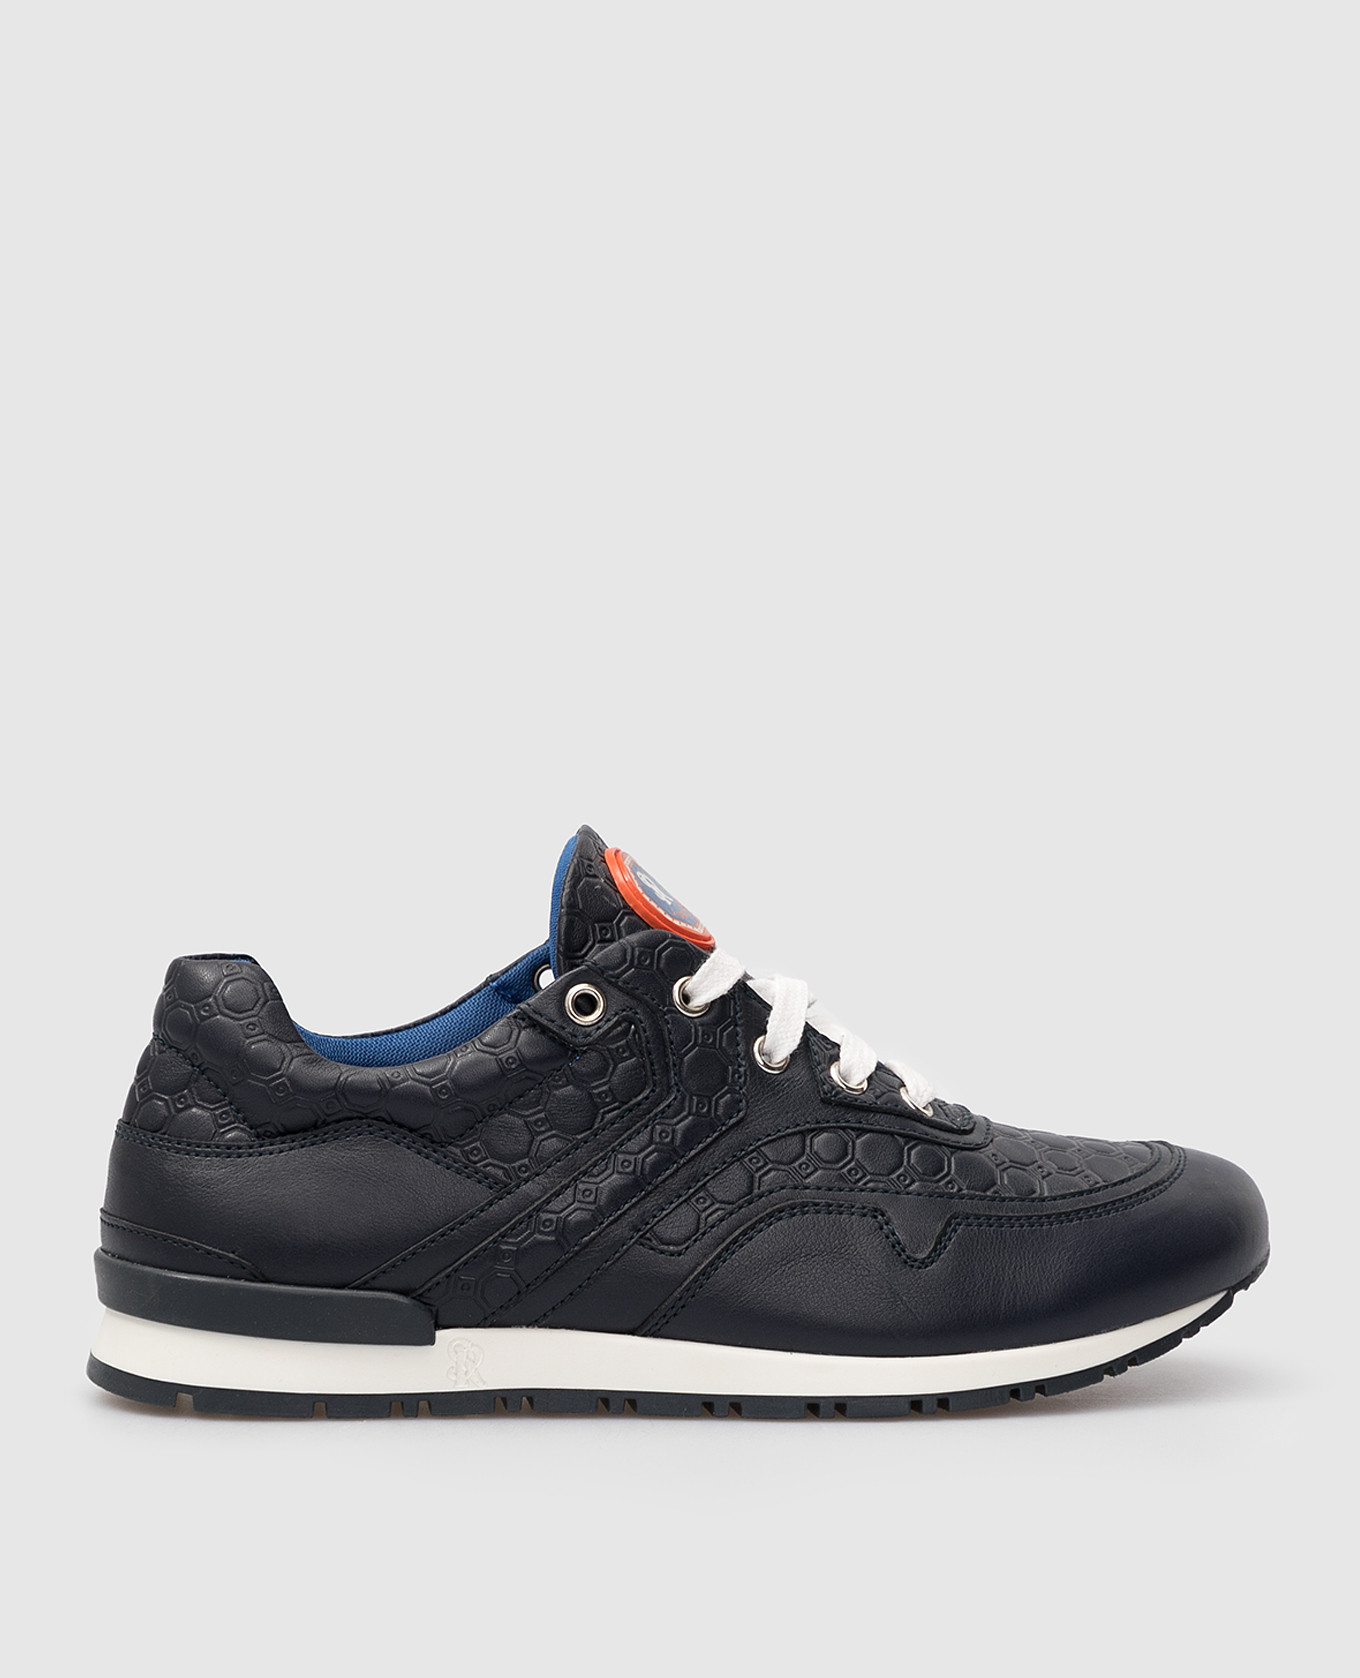 Children's Navy Blue Patterned Leather Sneakers